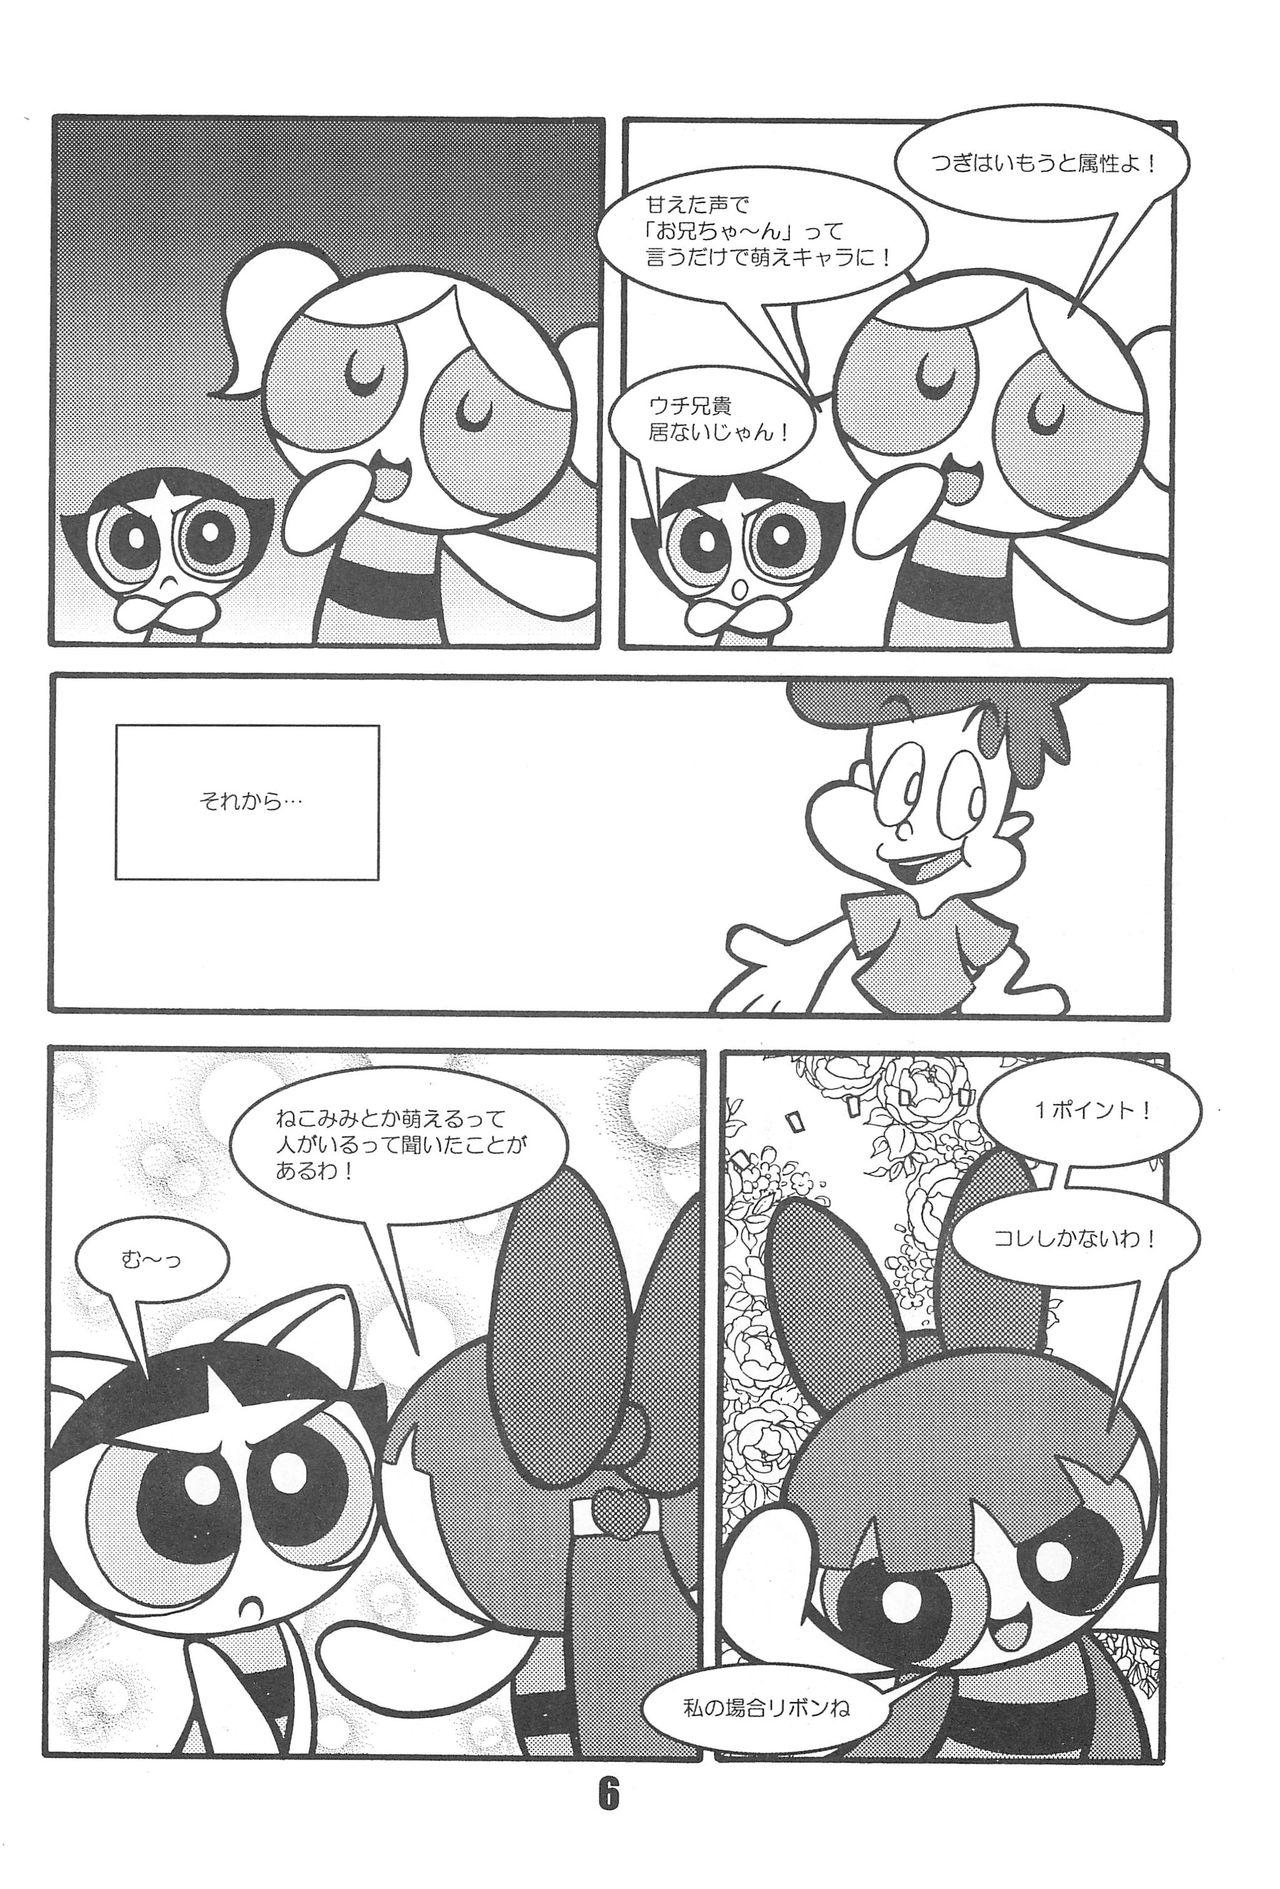 Tgirl Show Goes On! Funhouse 22th - The powerpuff girls Gapes Gaping Asshole - Page 6